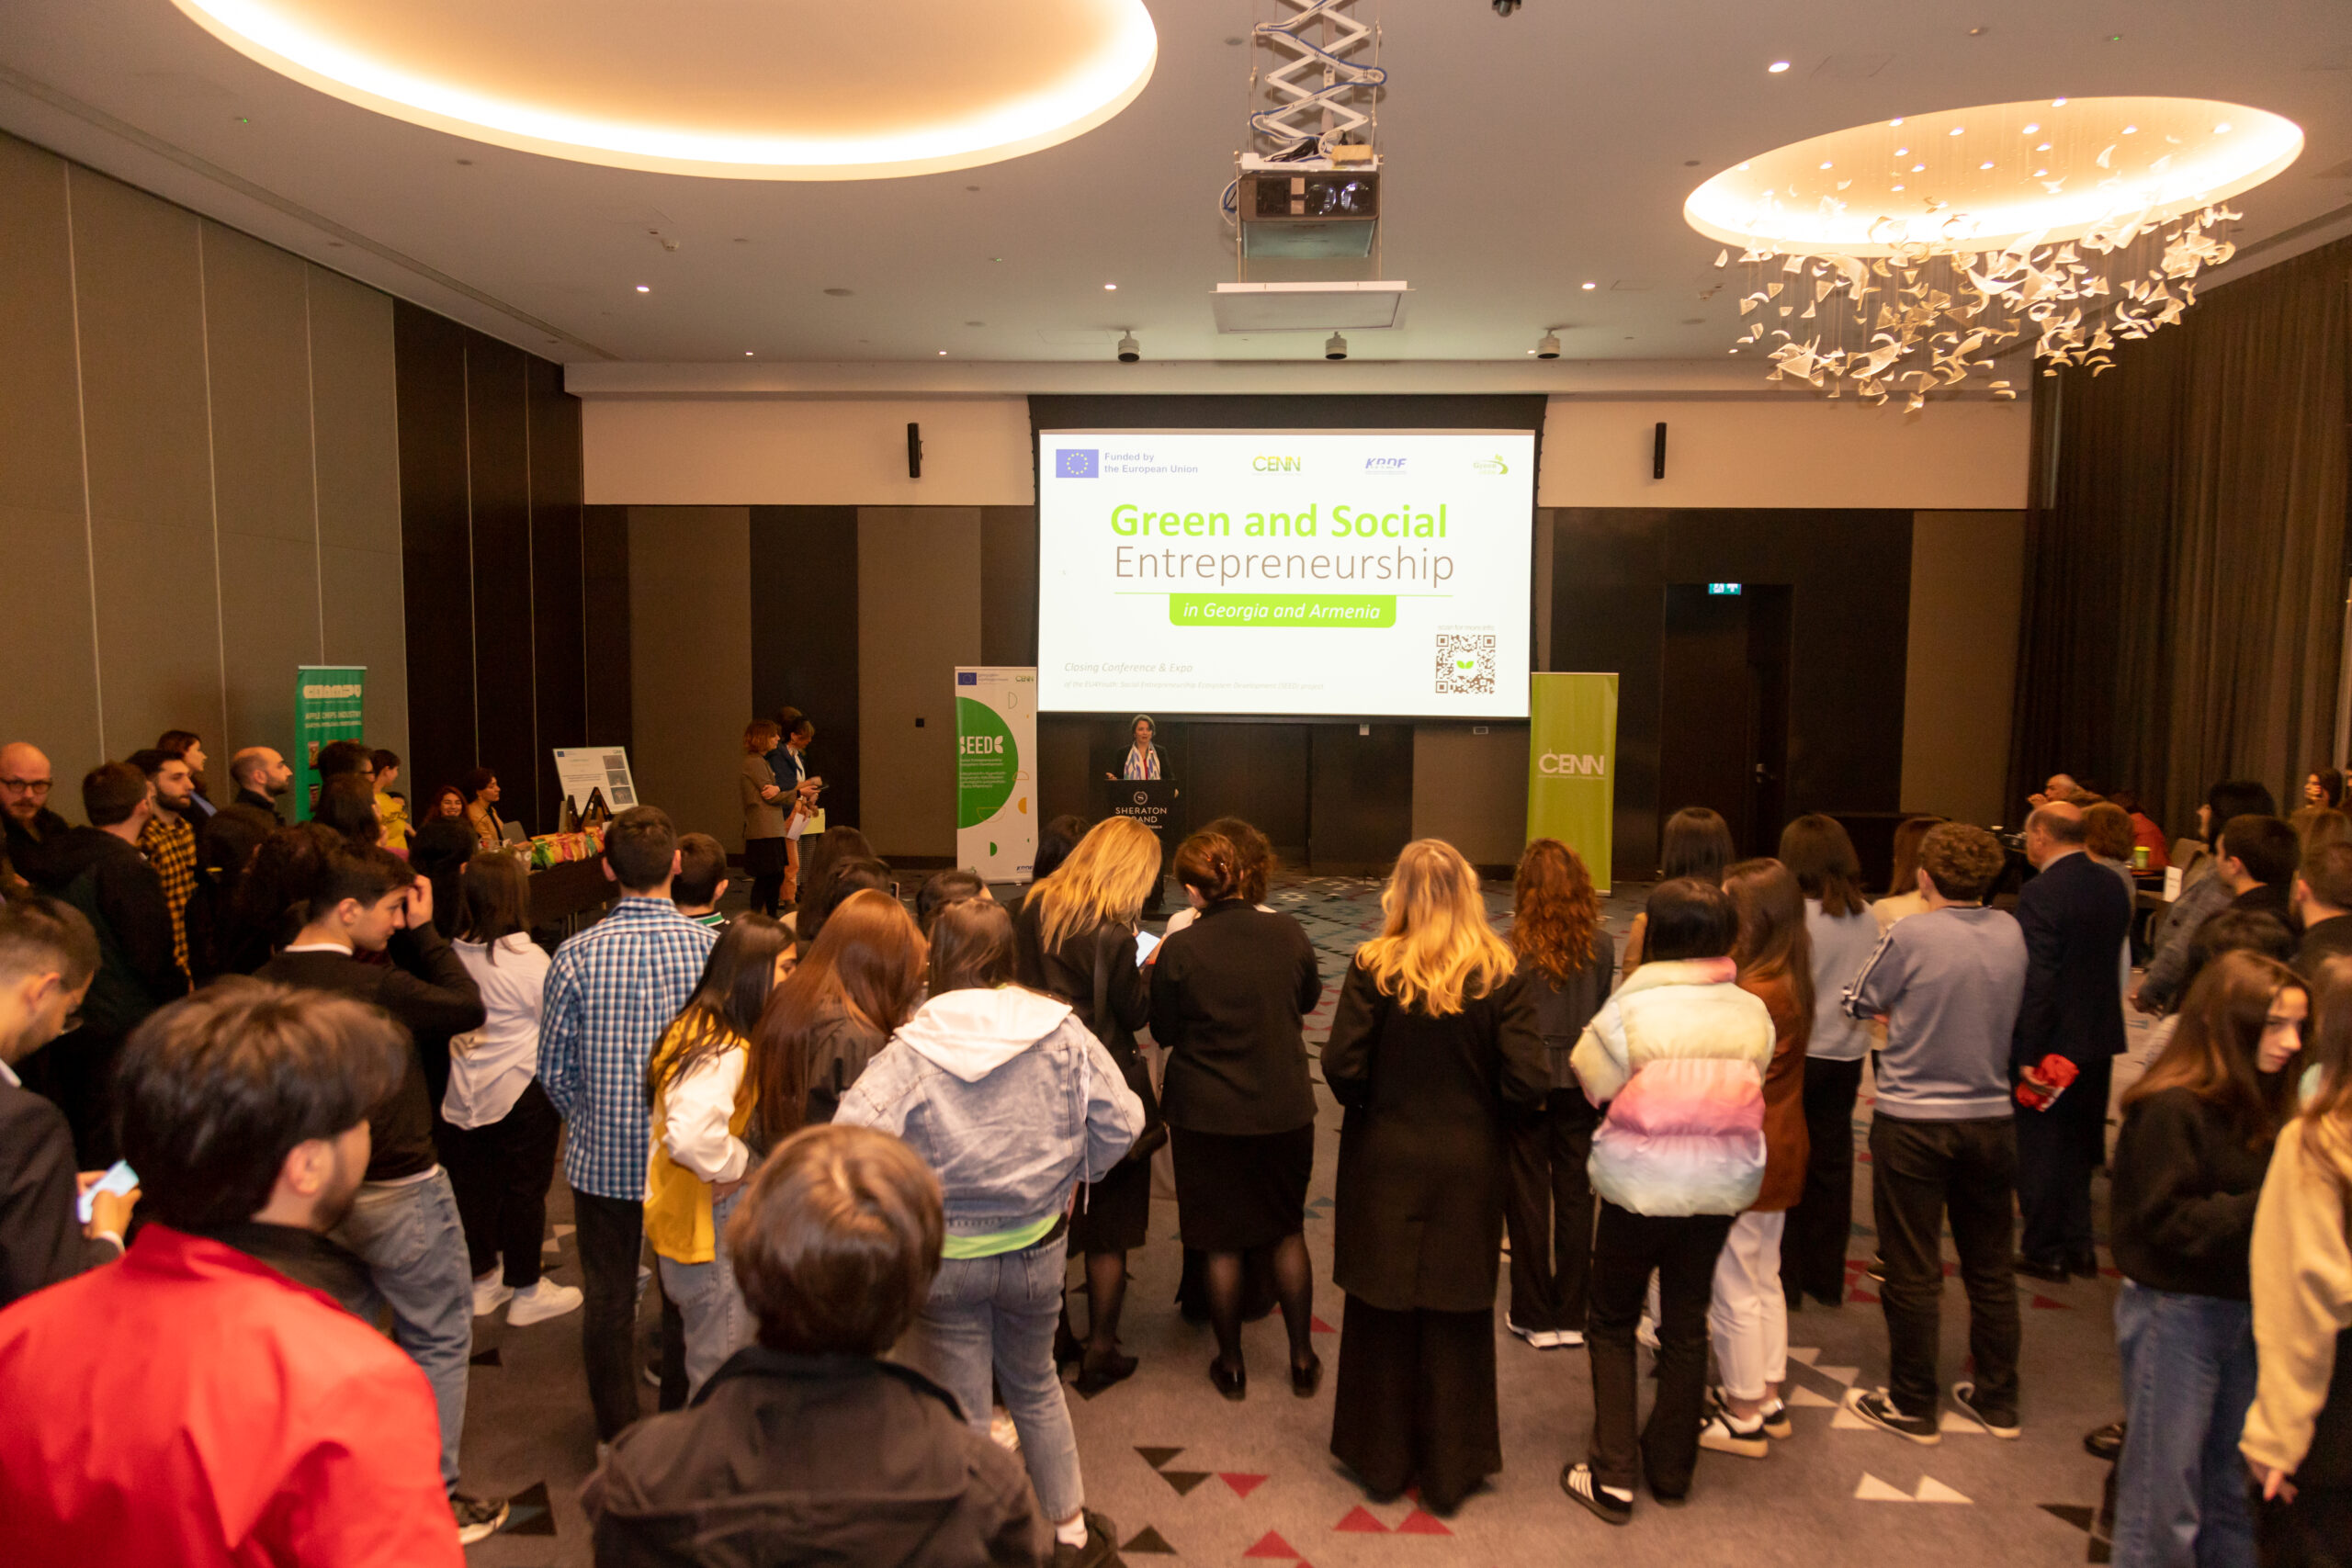 EU And CENN Held a Closing Conference for the Project on Young Social and Green Entrepreneurs